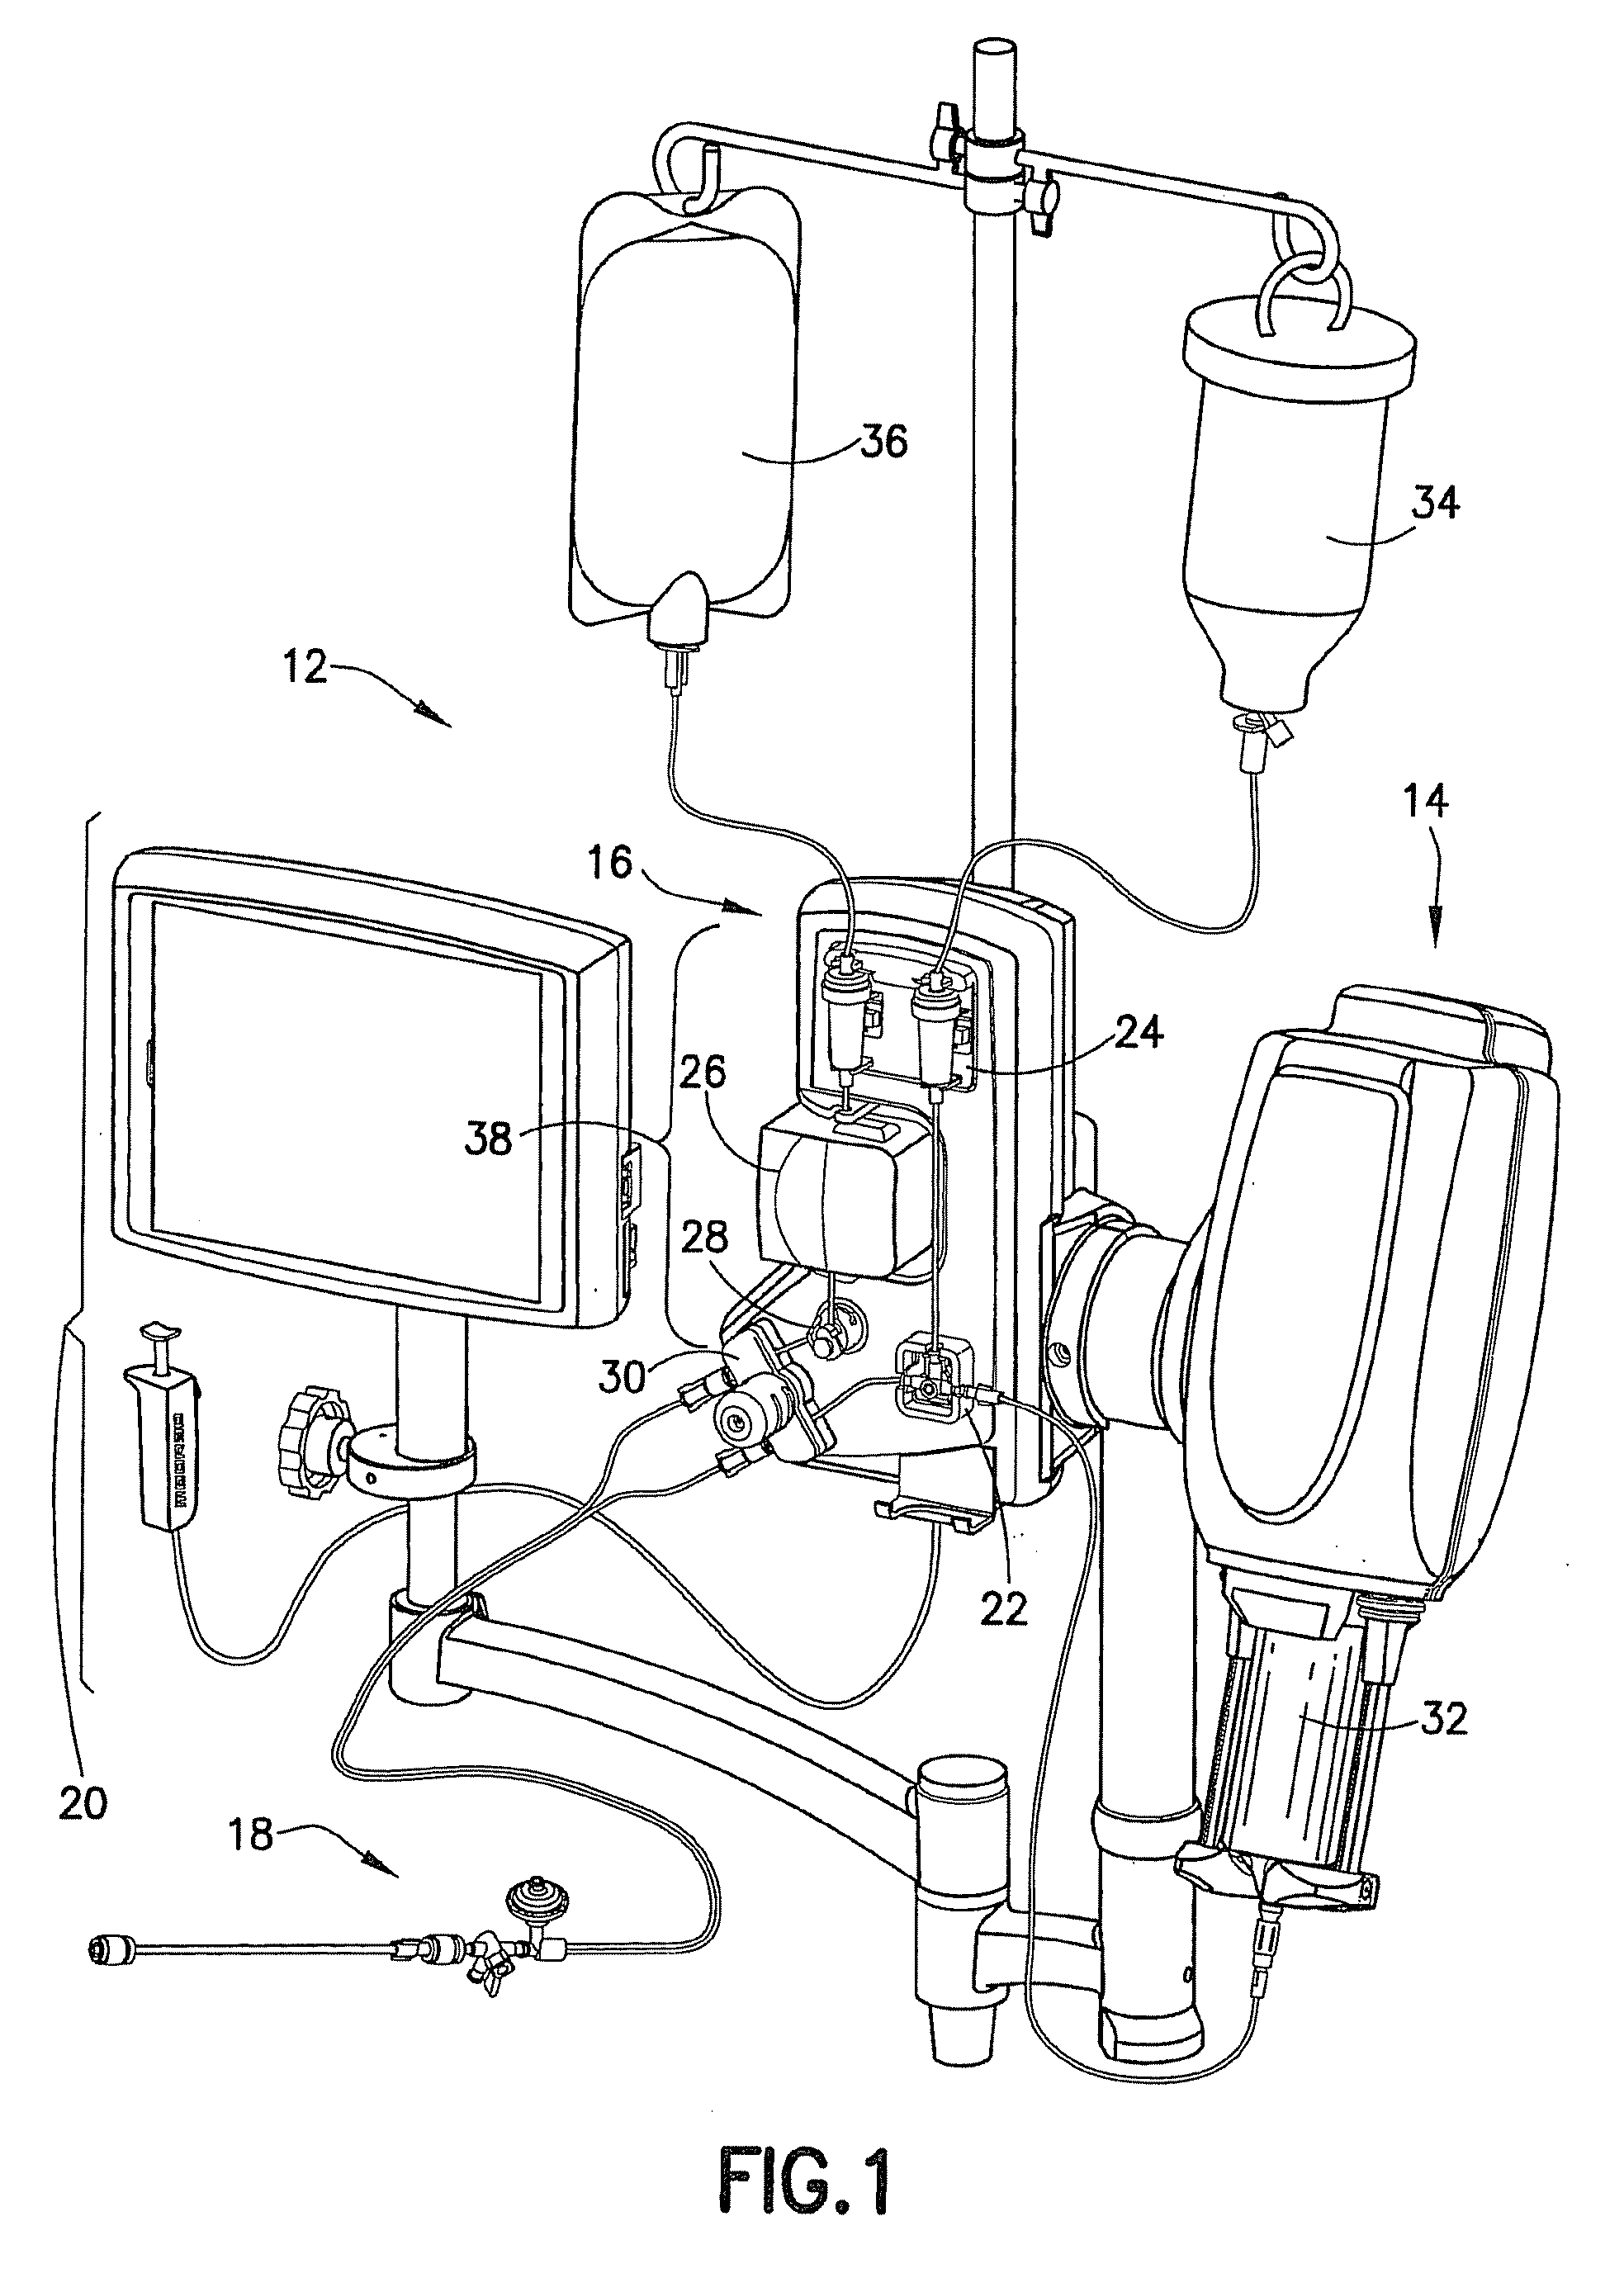 Flow Based Pressure Isolation and Fluid Delivery System Including Flow Based Pressure Isolation and Flow Initiating Mechanism